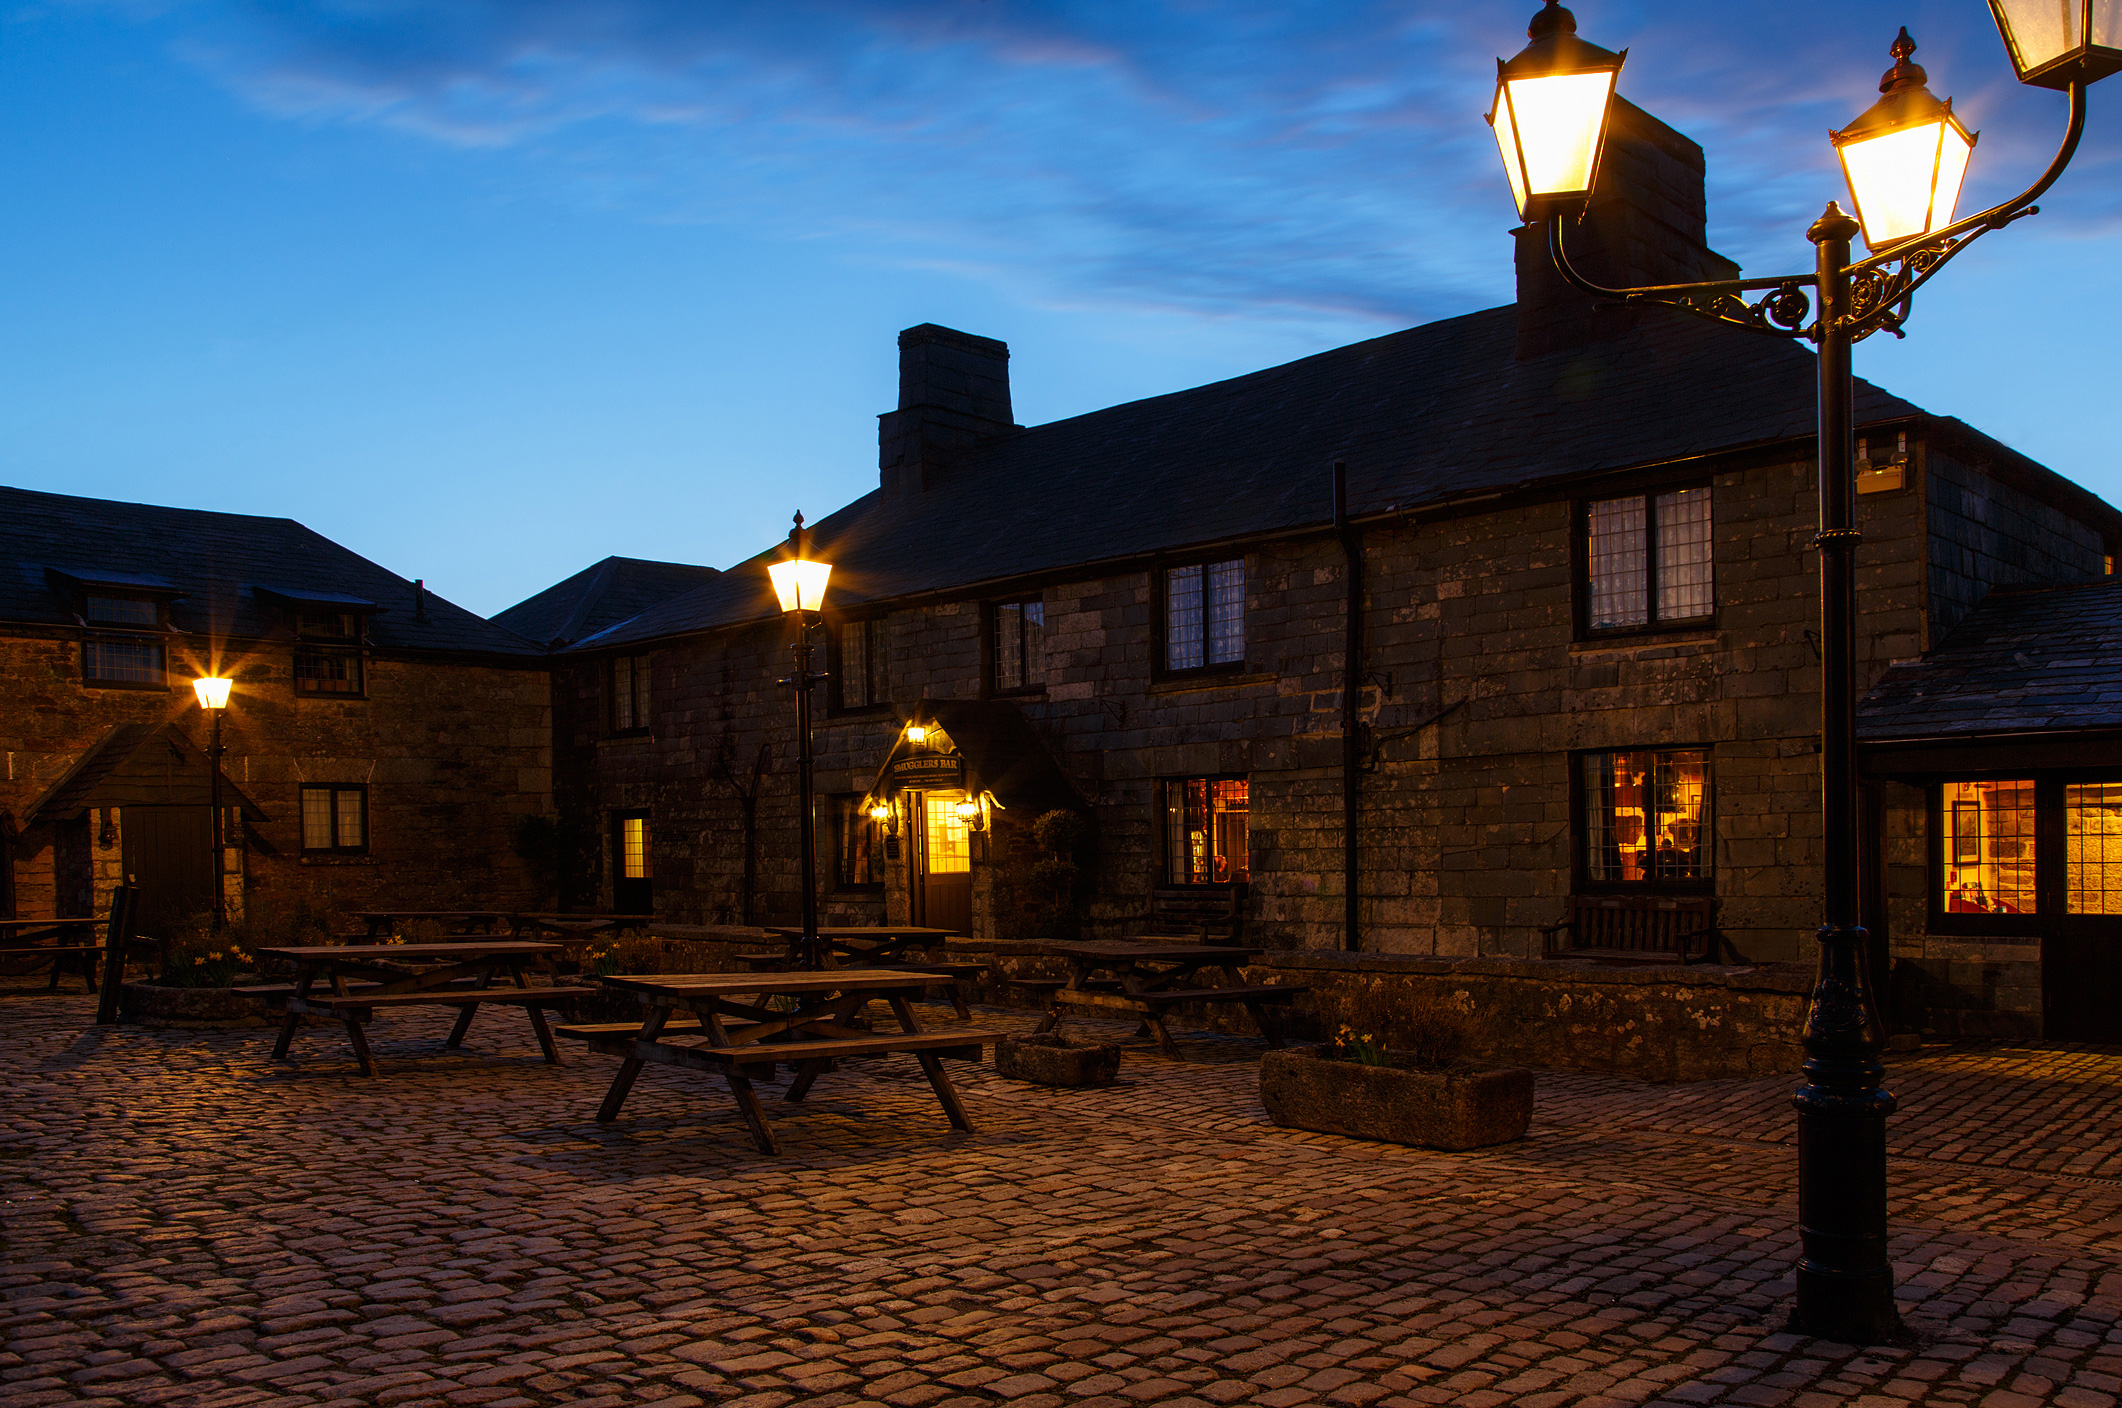 The REAL Jamaica Inn | The Exeter Daily